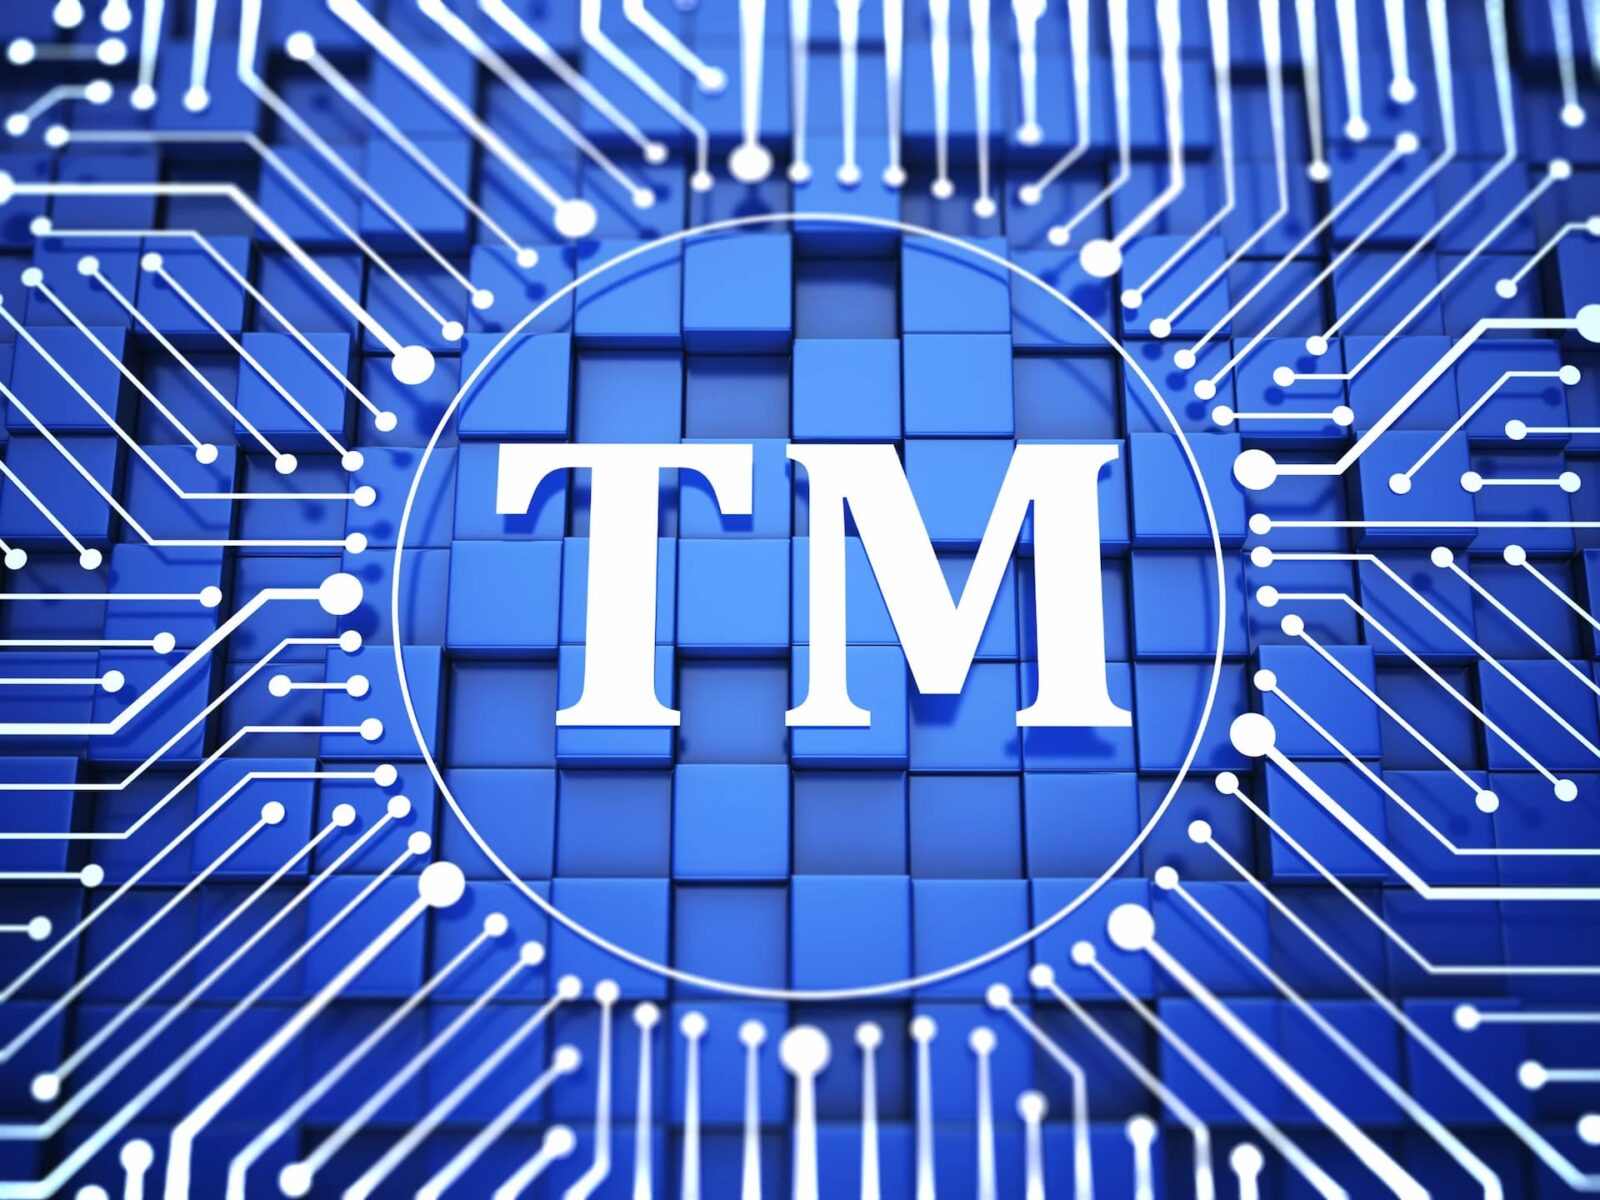 Trademark registration in any country